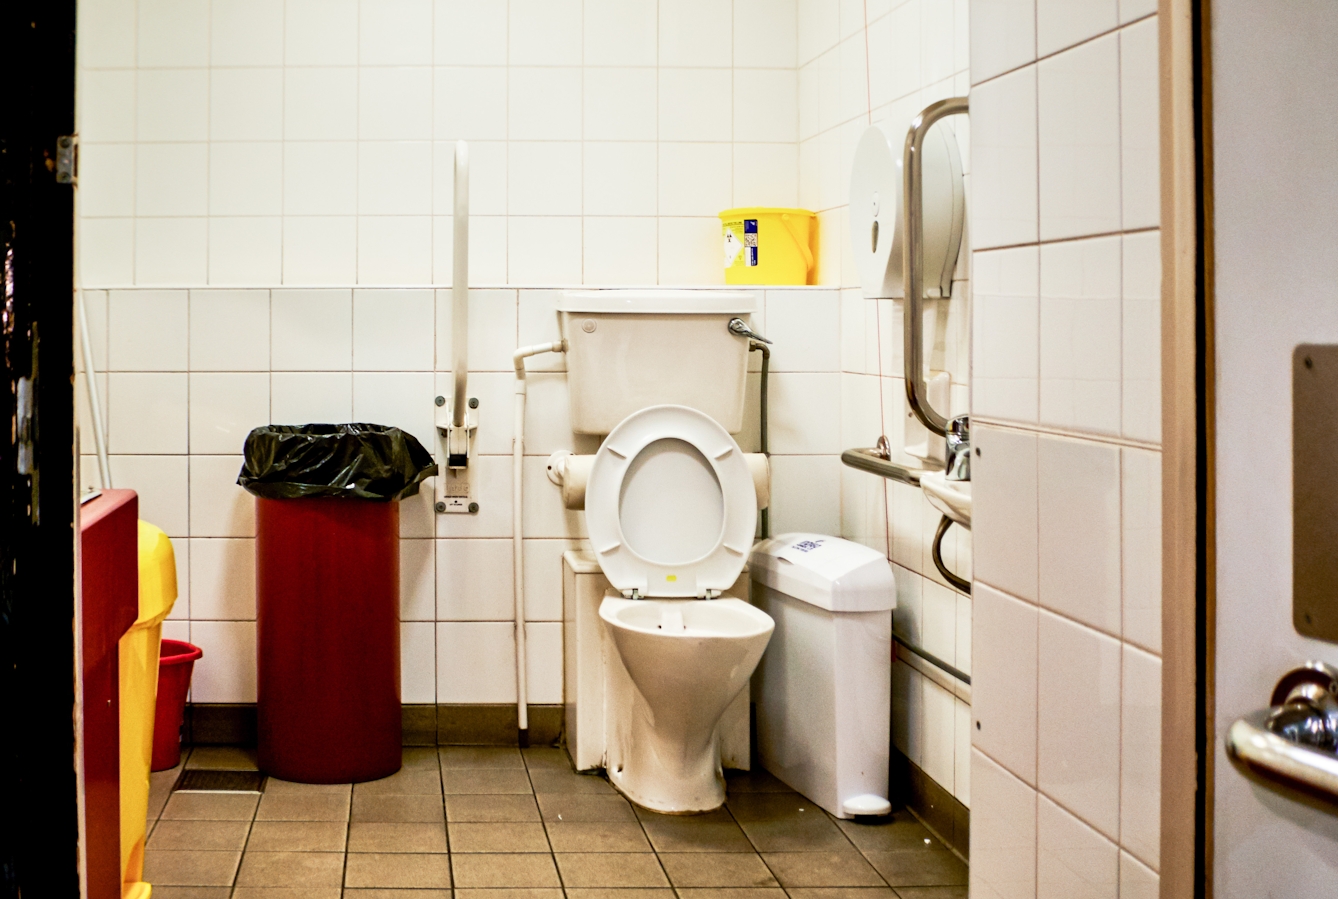 Photograph though the doorway of an accessible toilet showing part of the door and doorframe, along with the contents of the room, toilet, basin and sanitary bins. The room looks run down and dirty.